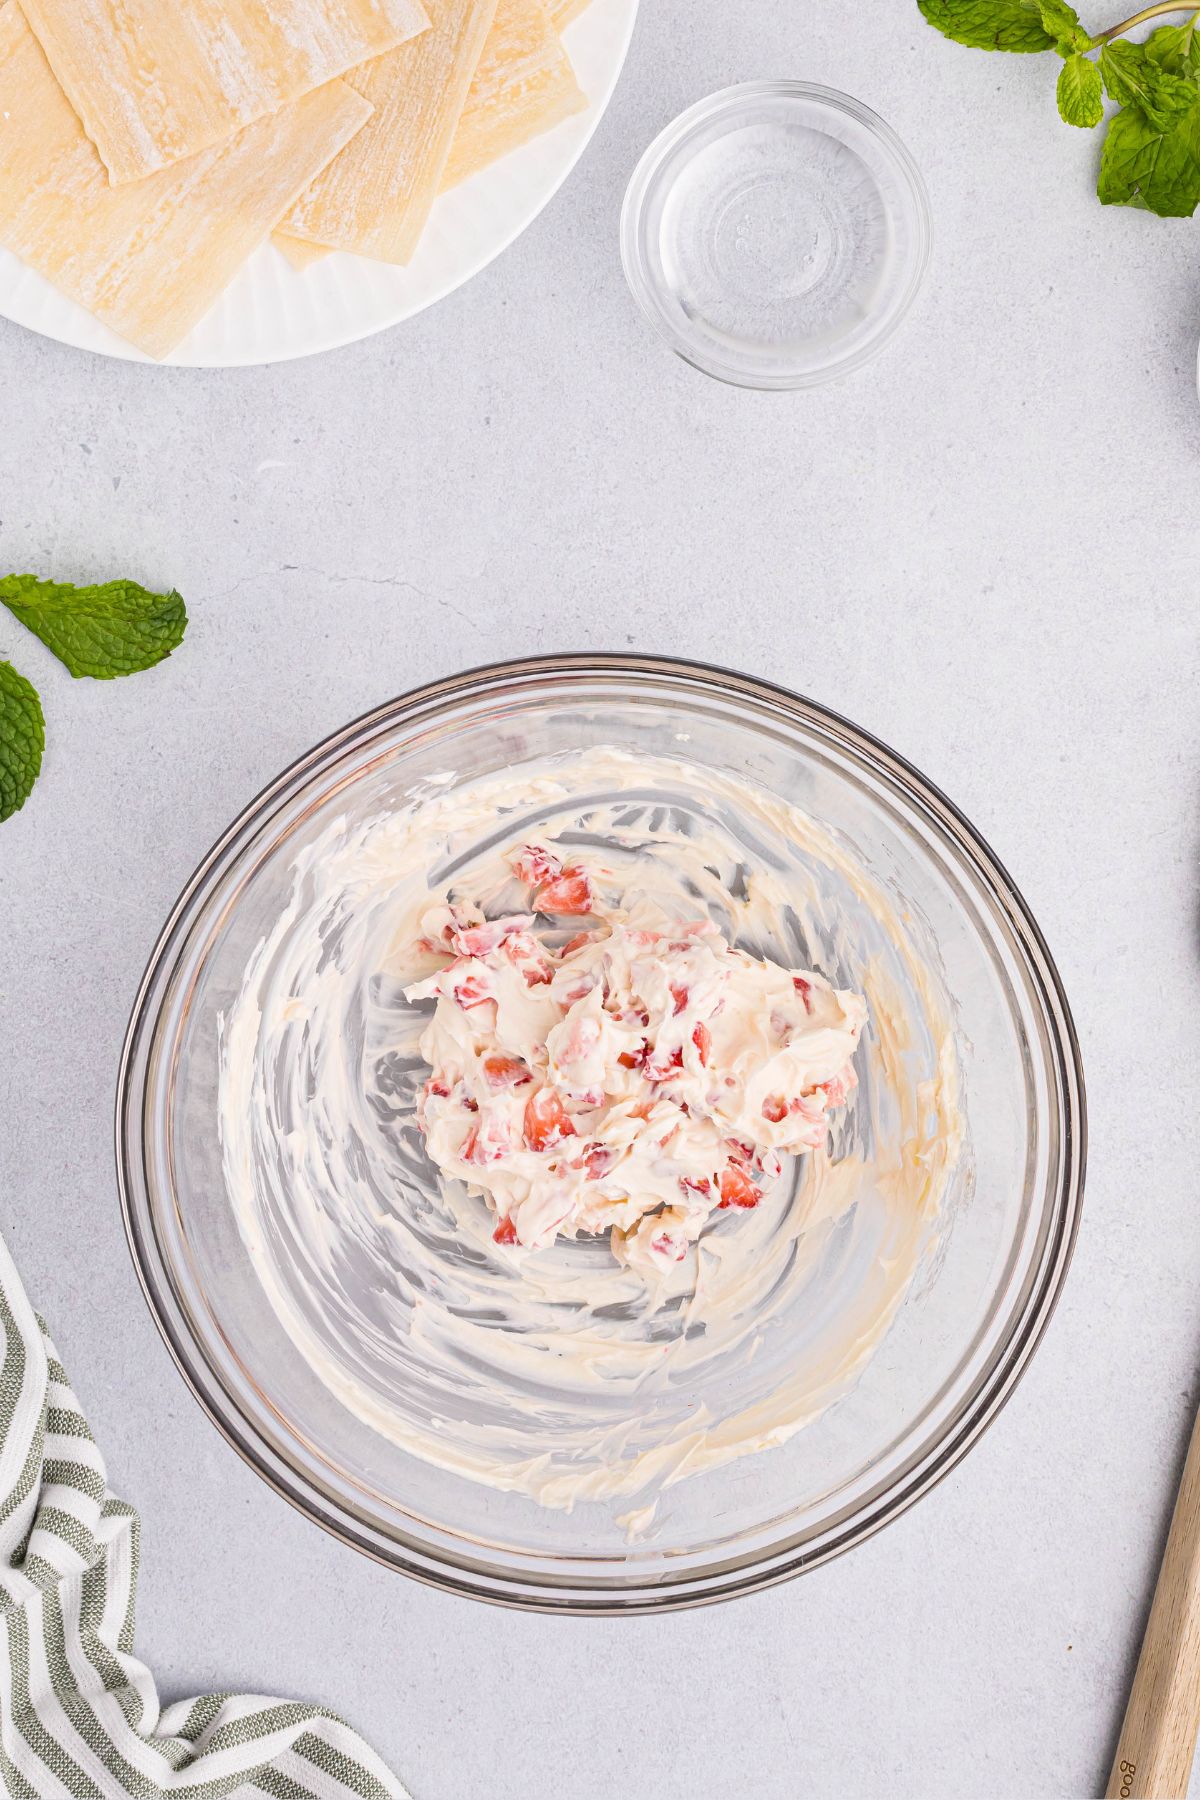 Cream cheese, sugars, and strawberries mixed in a clear glass bowl on a white marble table.